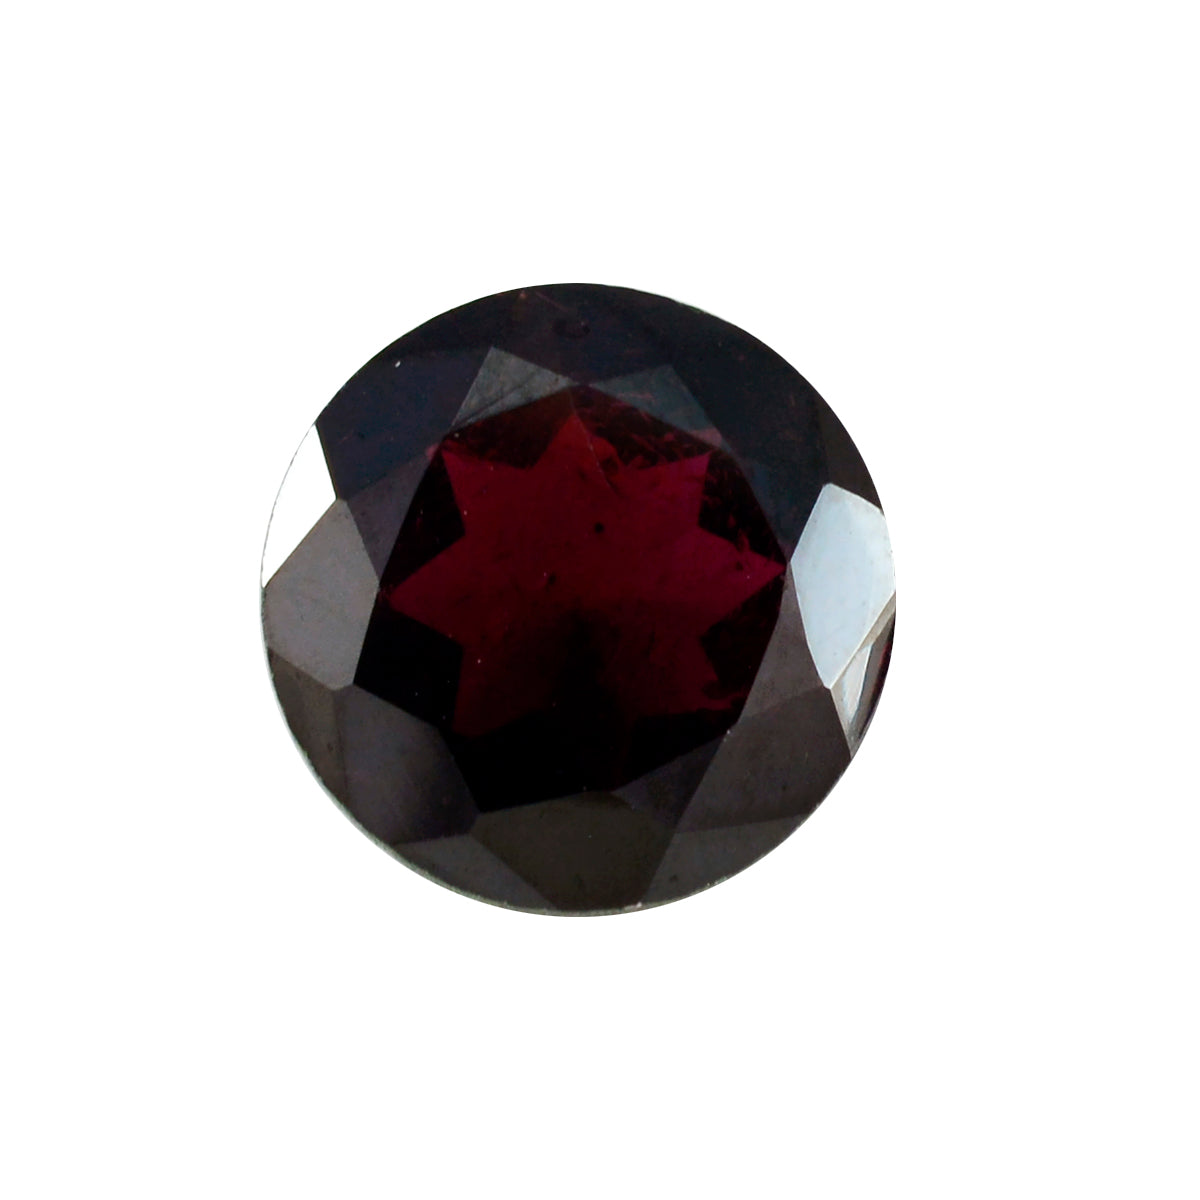 Riyogems 1PC Real Red Garnet Faceted 14x14 mm Round Shape A+1 Quality Loose Gems